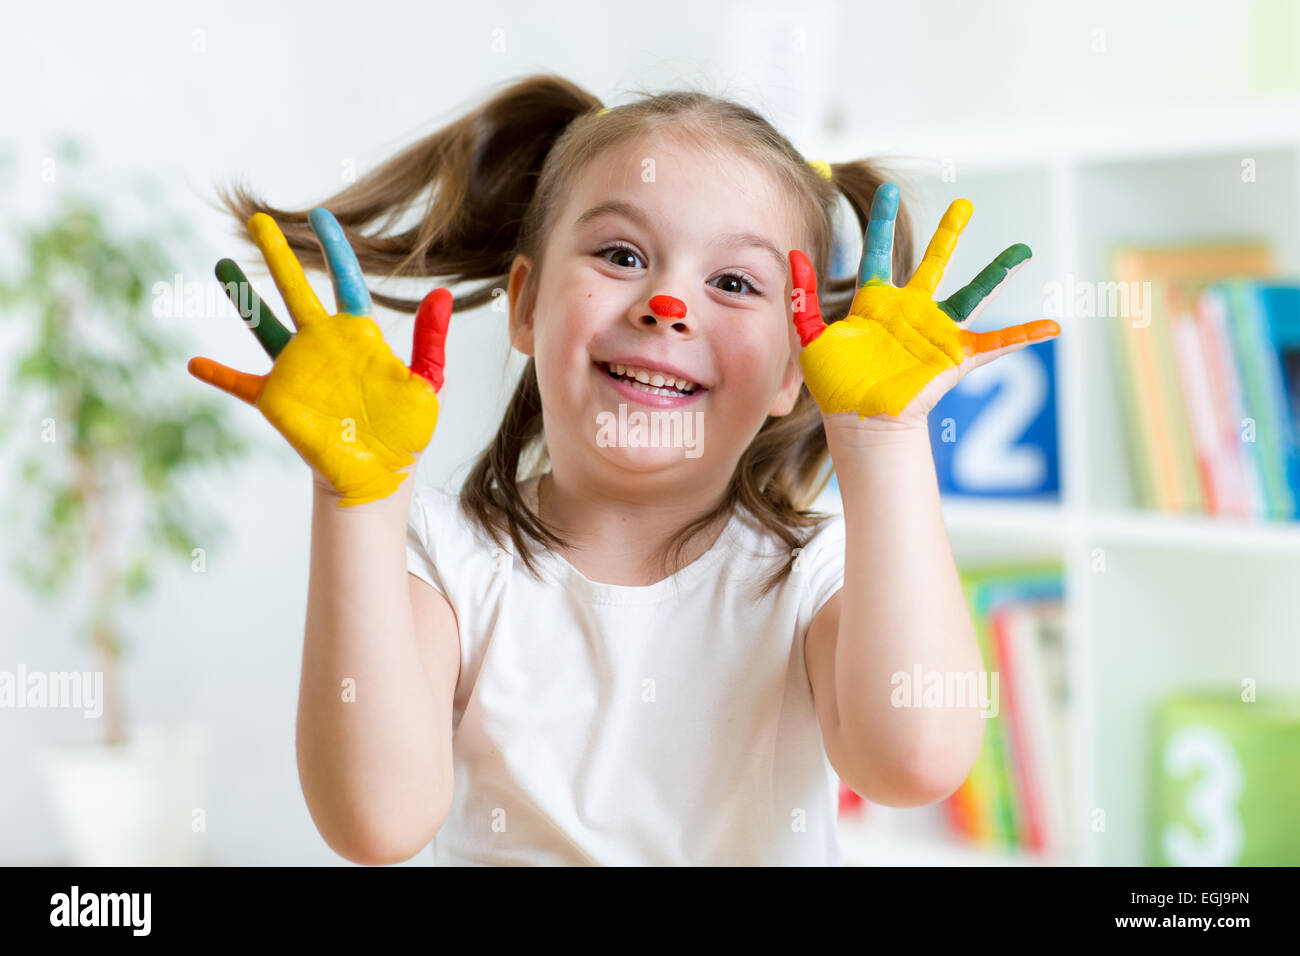 Funny kid with hands painted in colorful paint Stock Photo